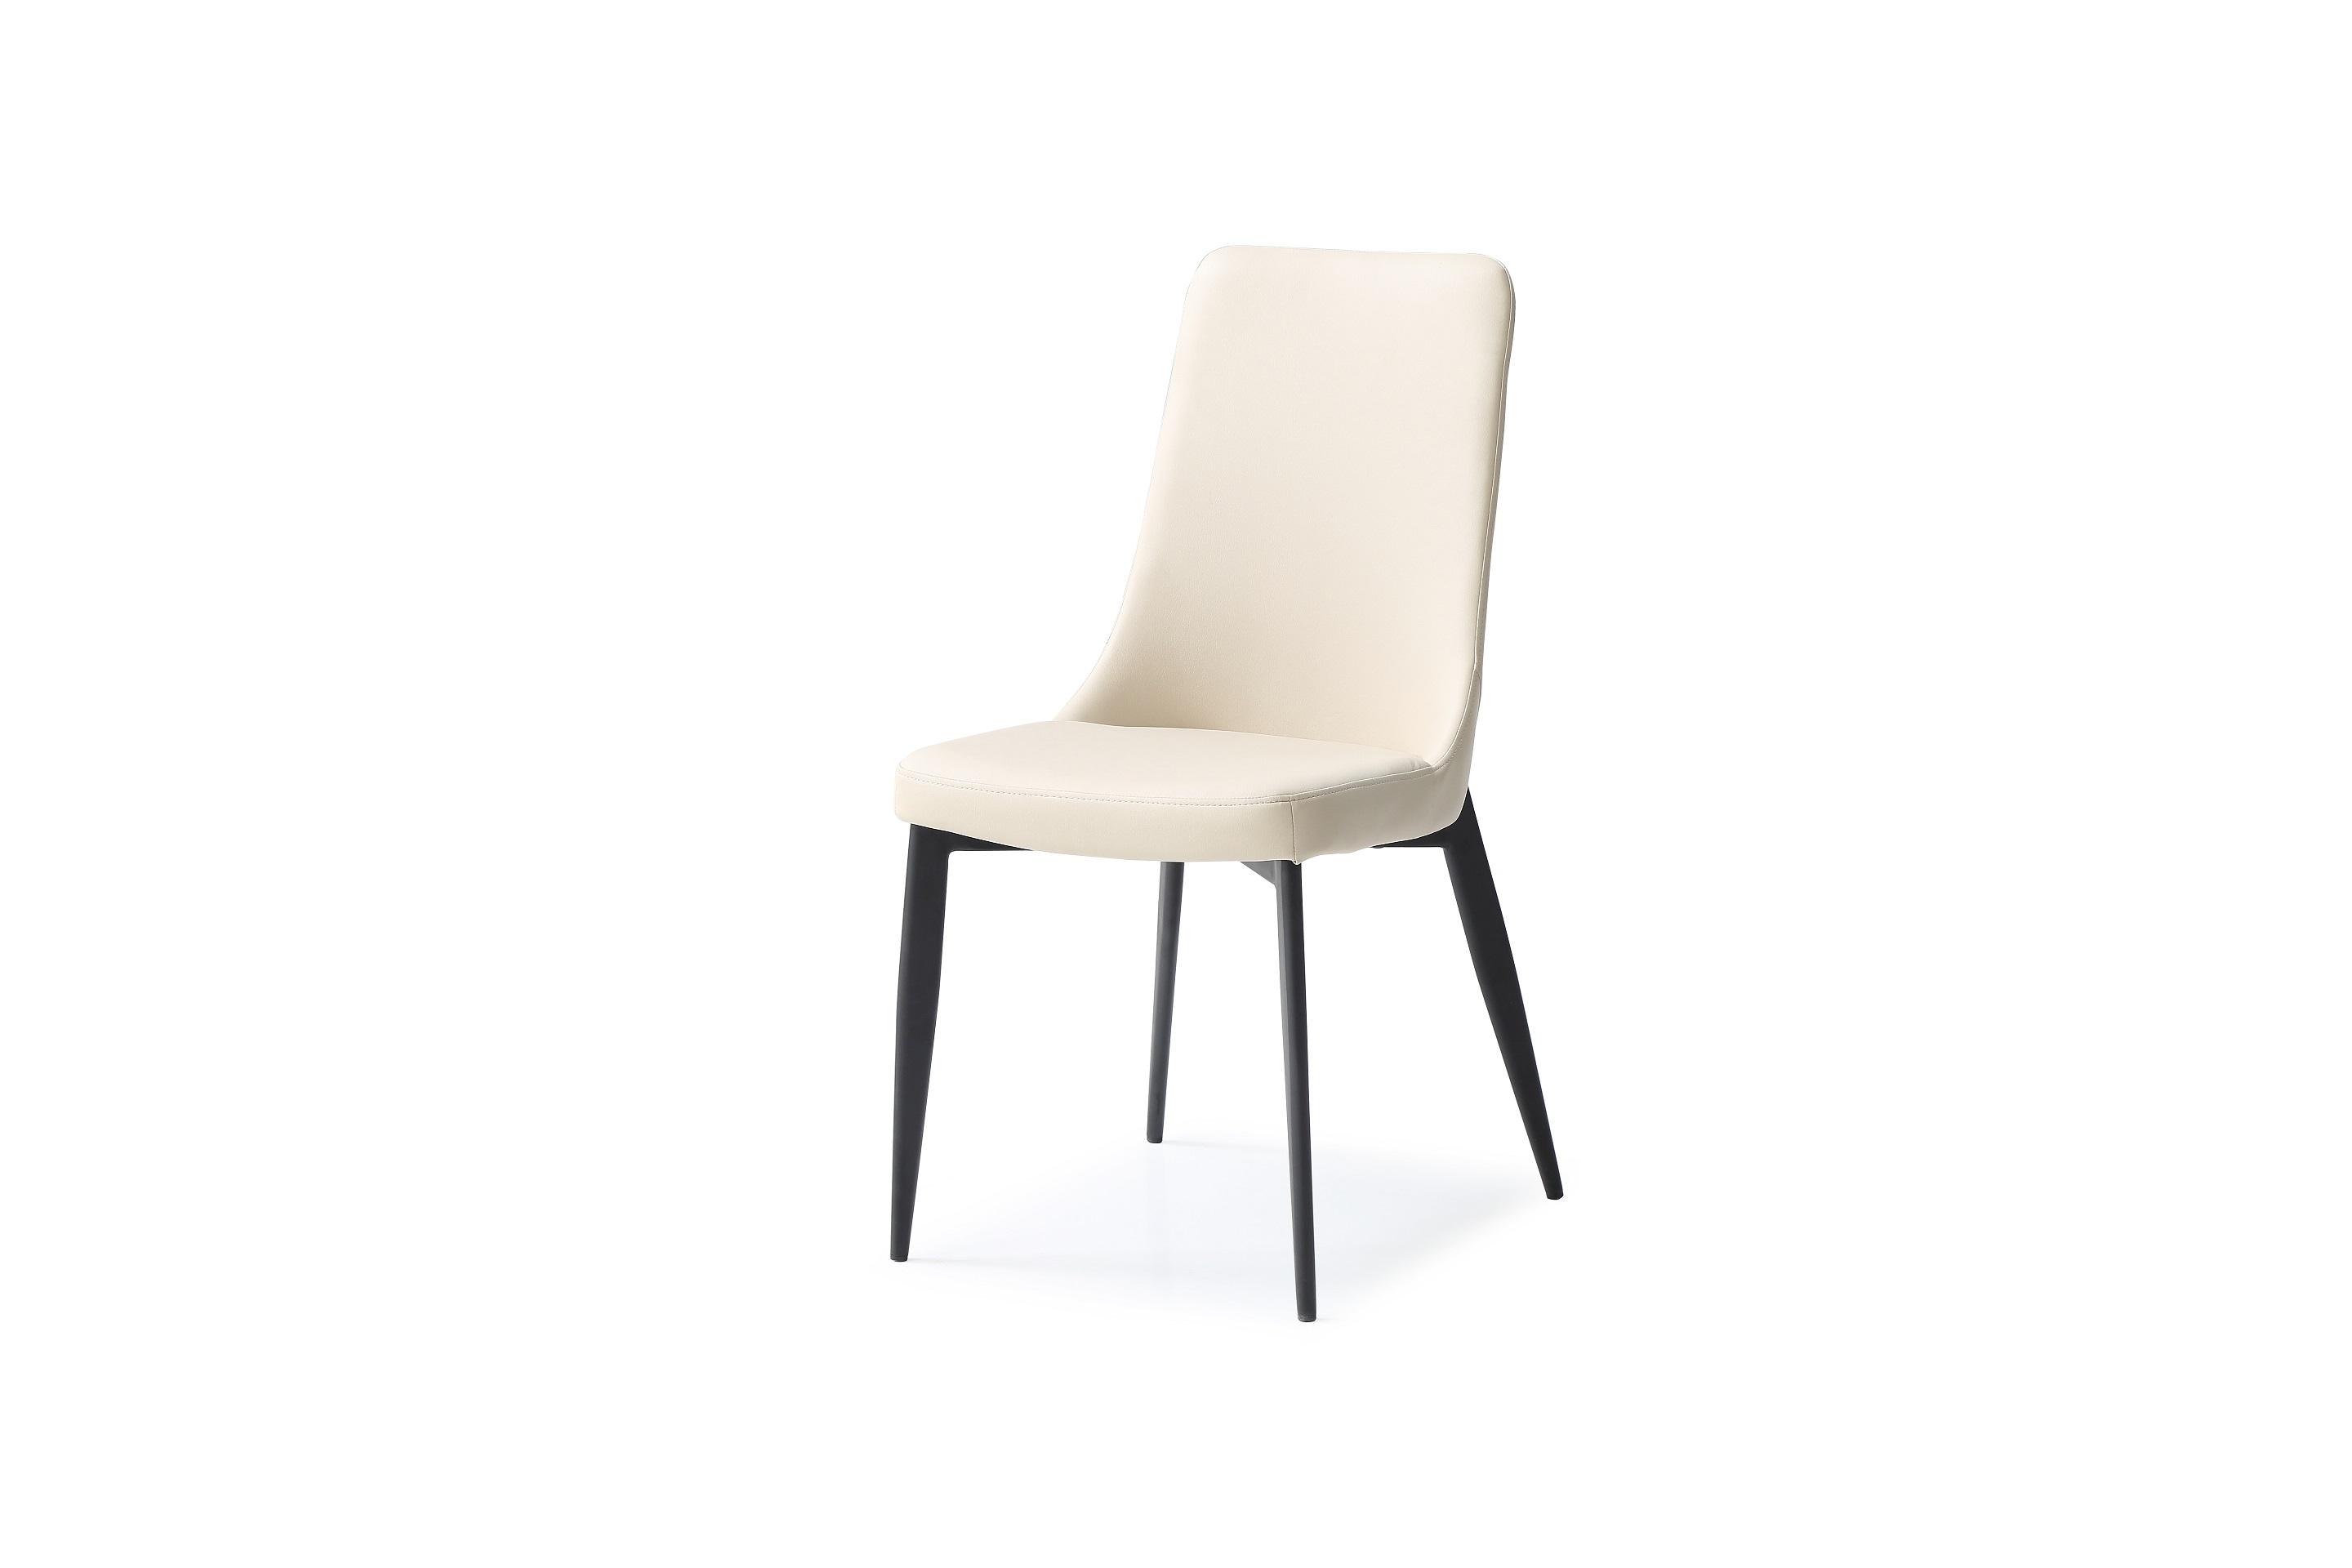 Modern Dining Chair Set DC1472-TAU Luca DC1472-TAU in Taupe Leather